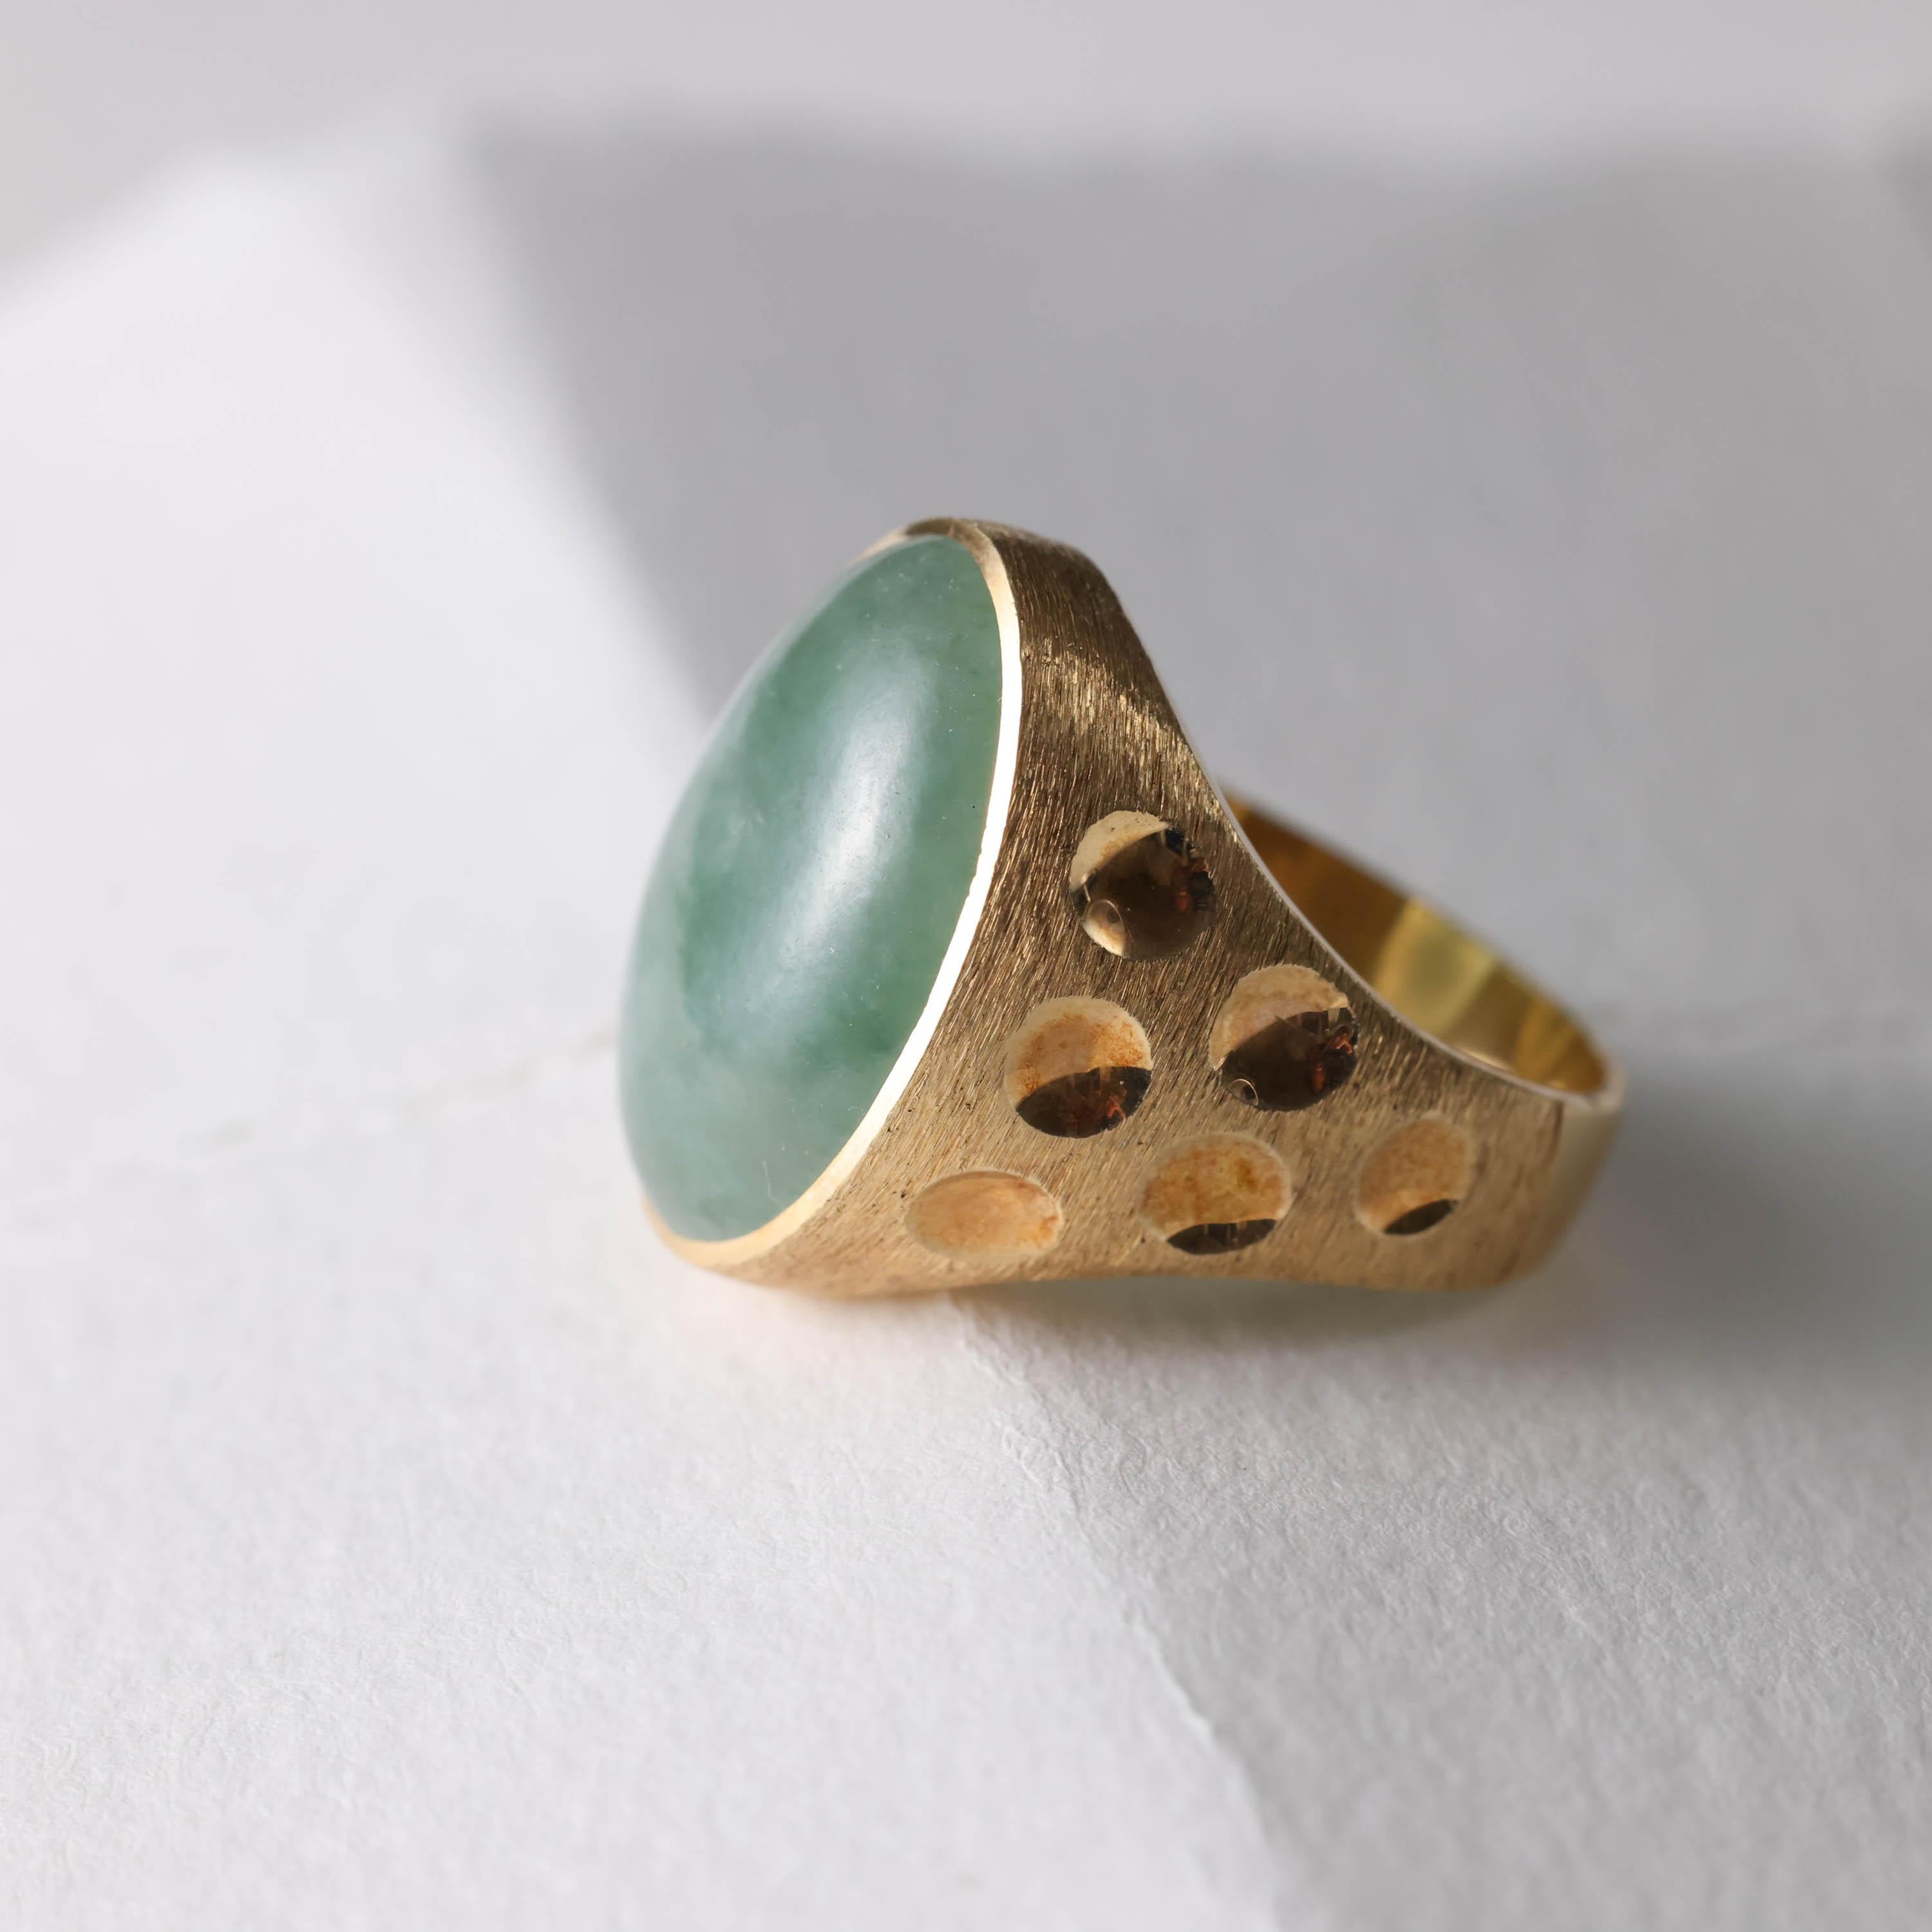 Midcentury Jadeite Men's Ring Certified Untreated, Eccentric Lux Quality In Excellent Condition For Sale In Southbury, CT